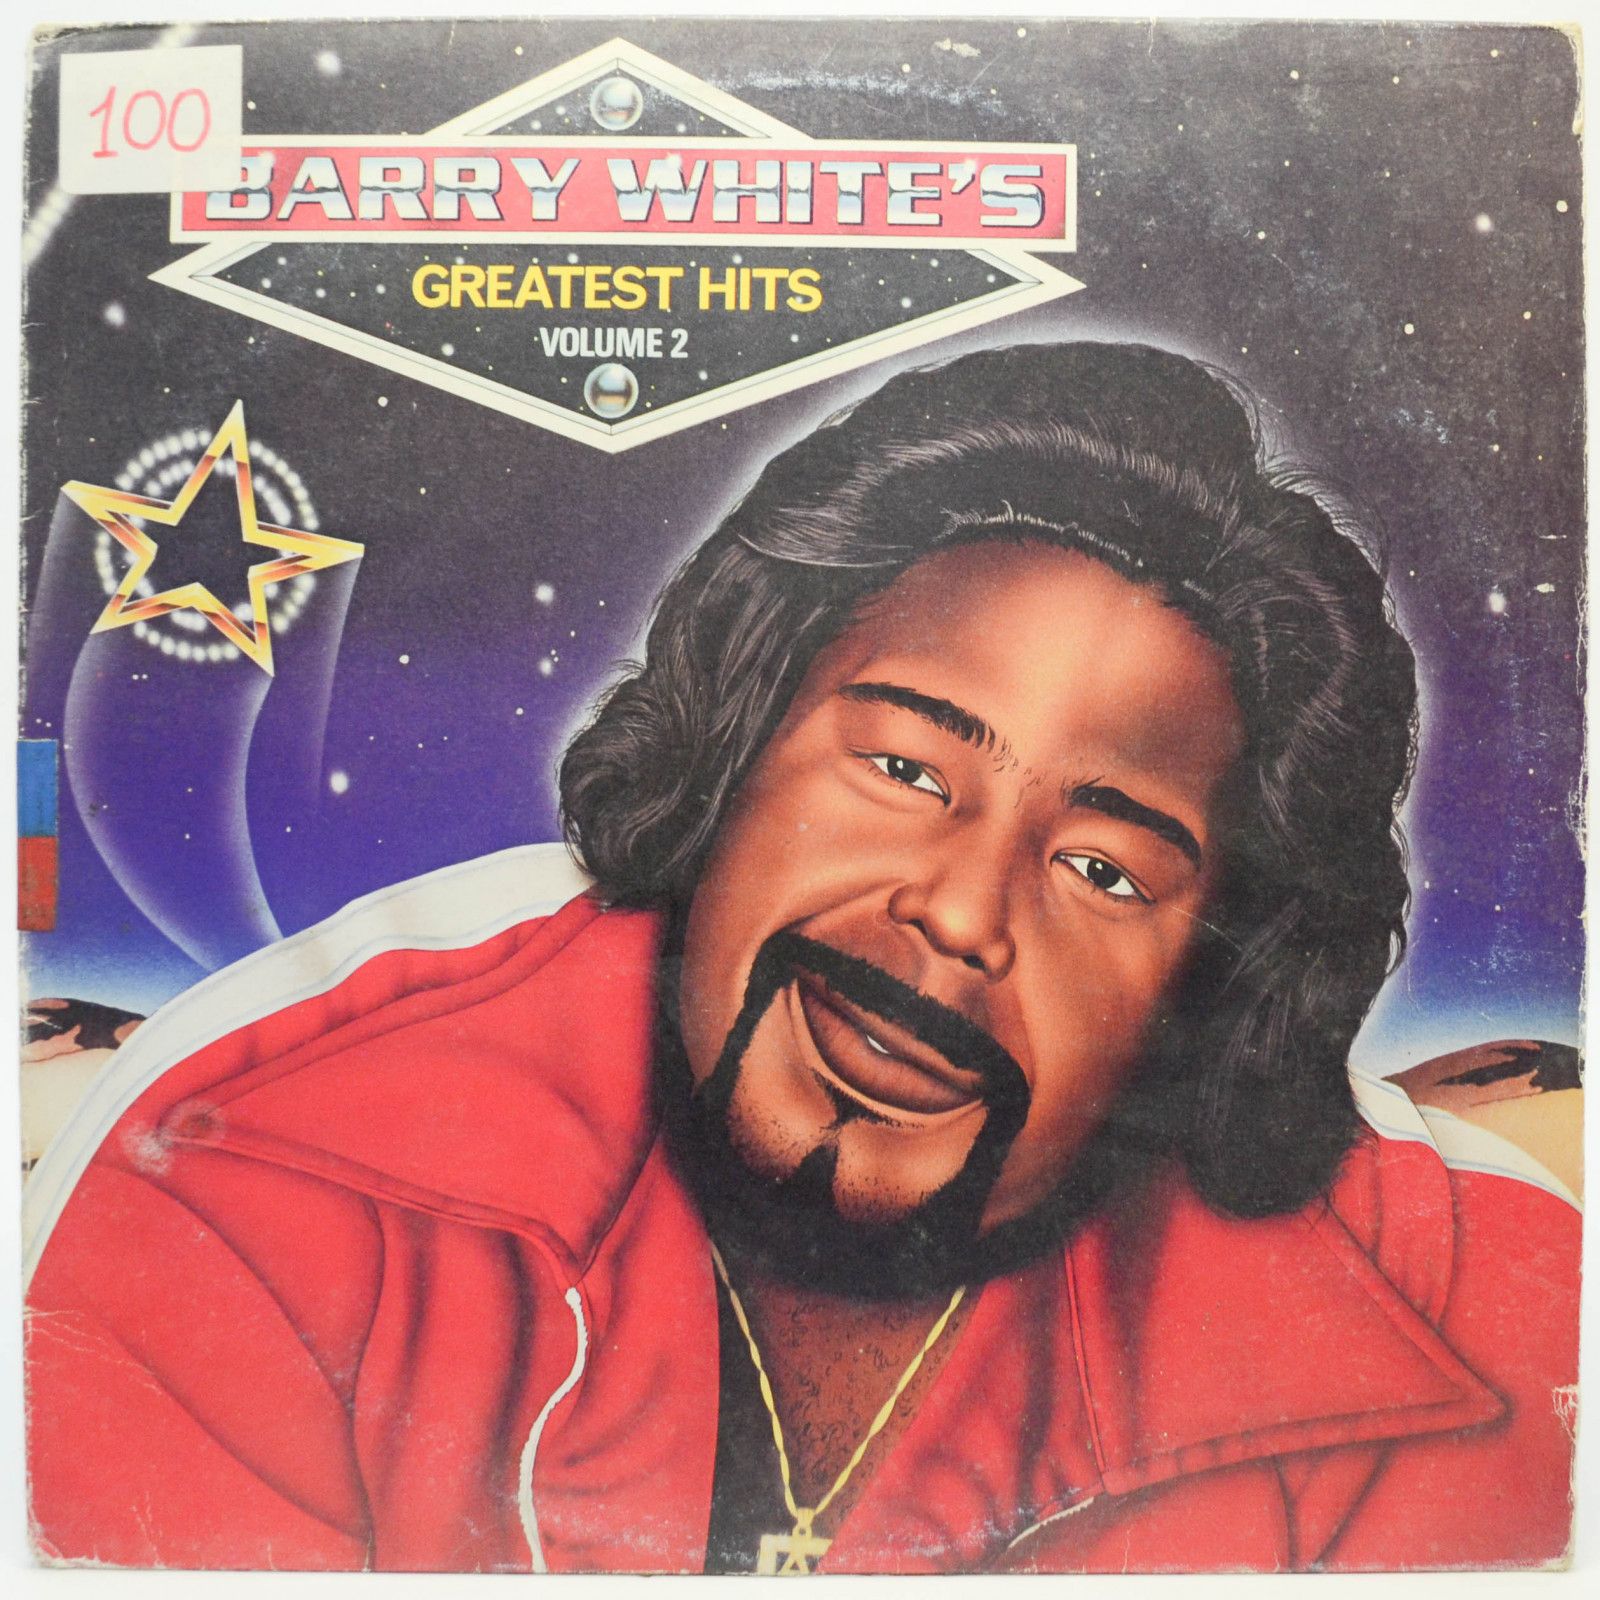 Barry White — Barry White's Greatest Hits Volume 2, 1981